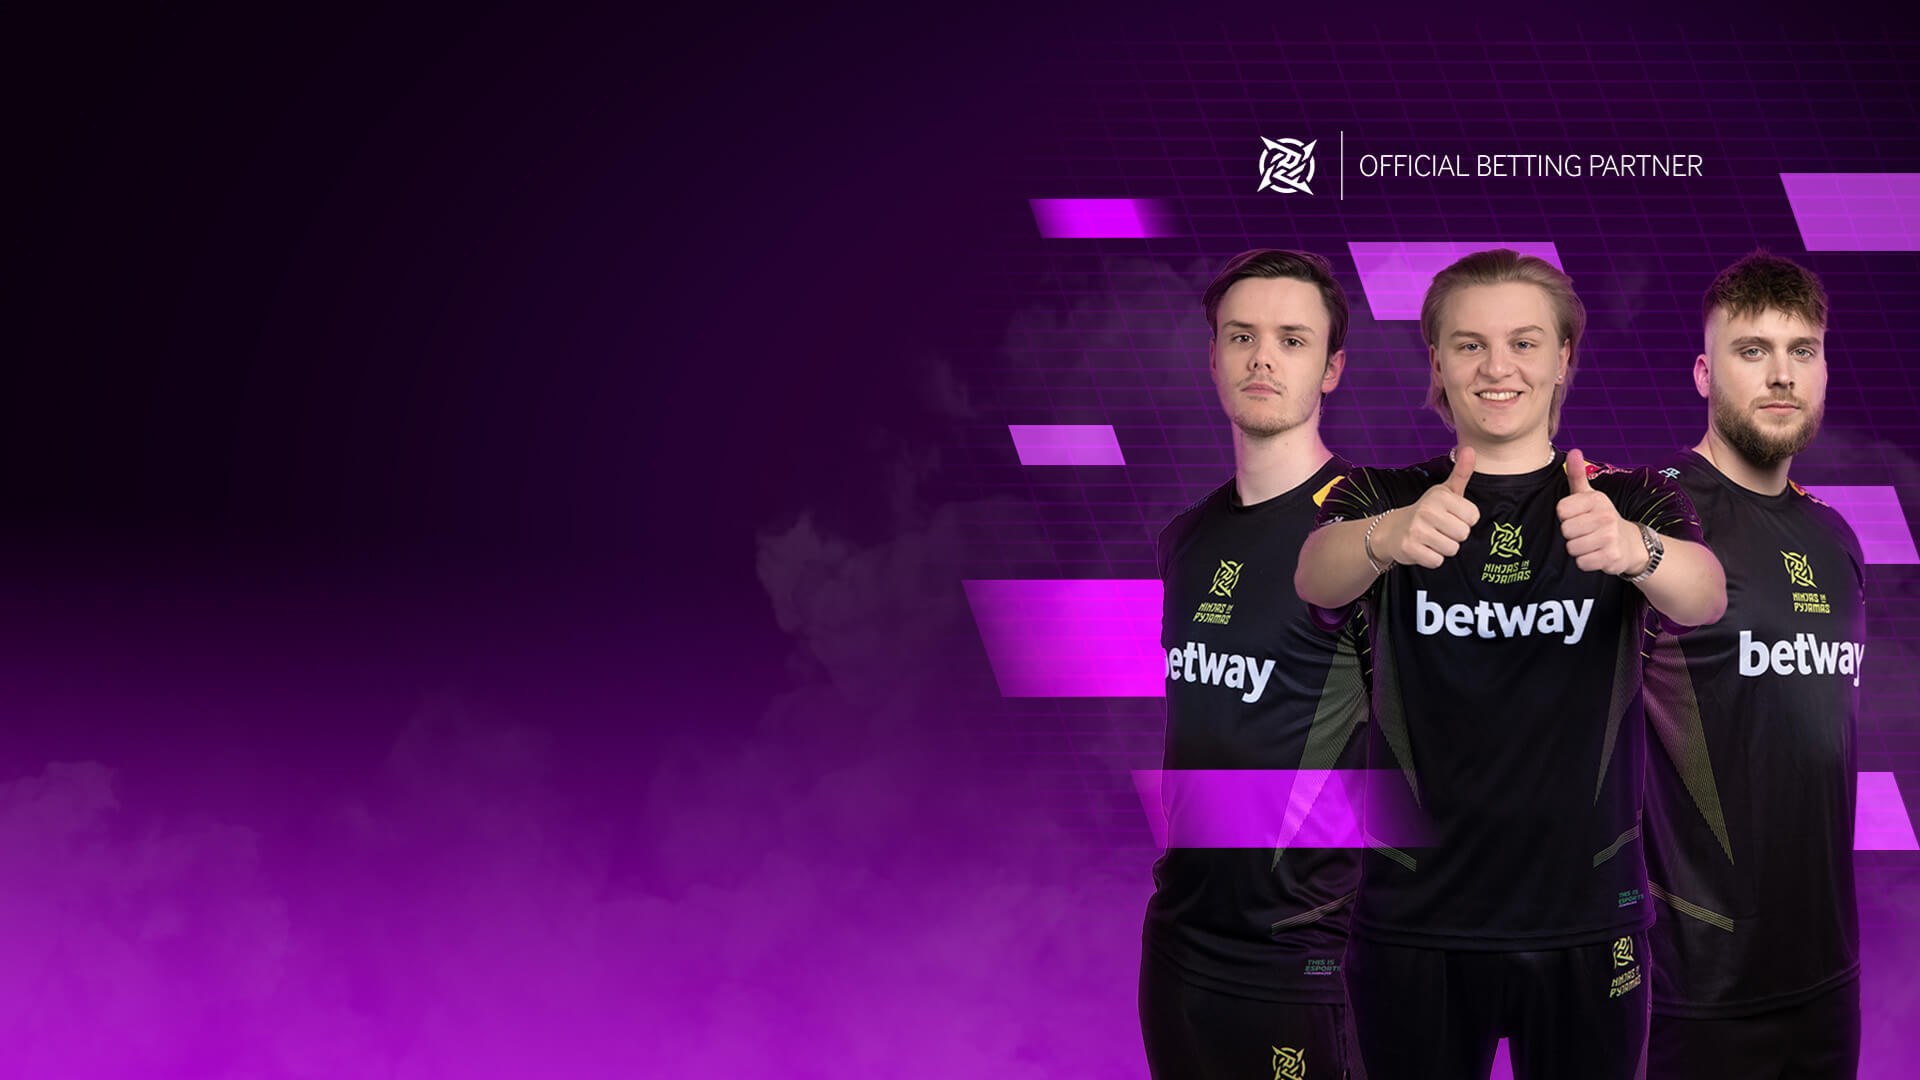 The Ultimate Guide to Betway Online Casino: Games, Bonuses, and More